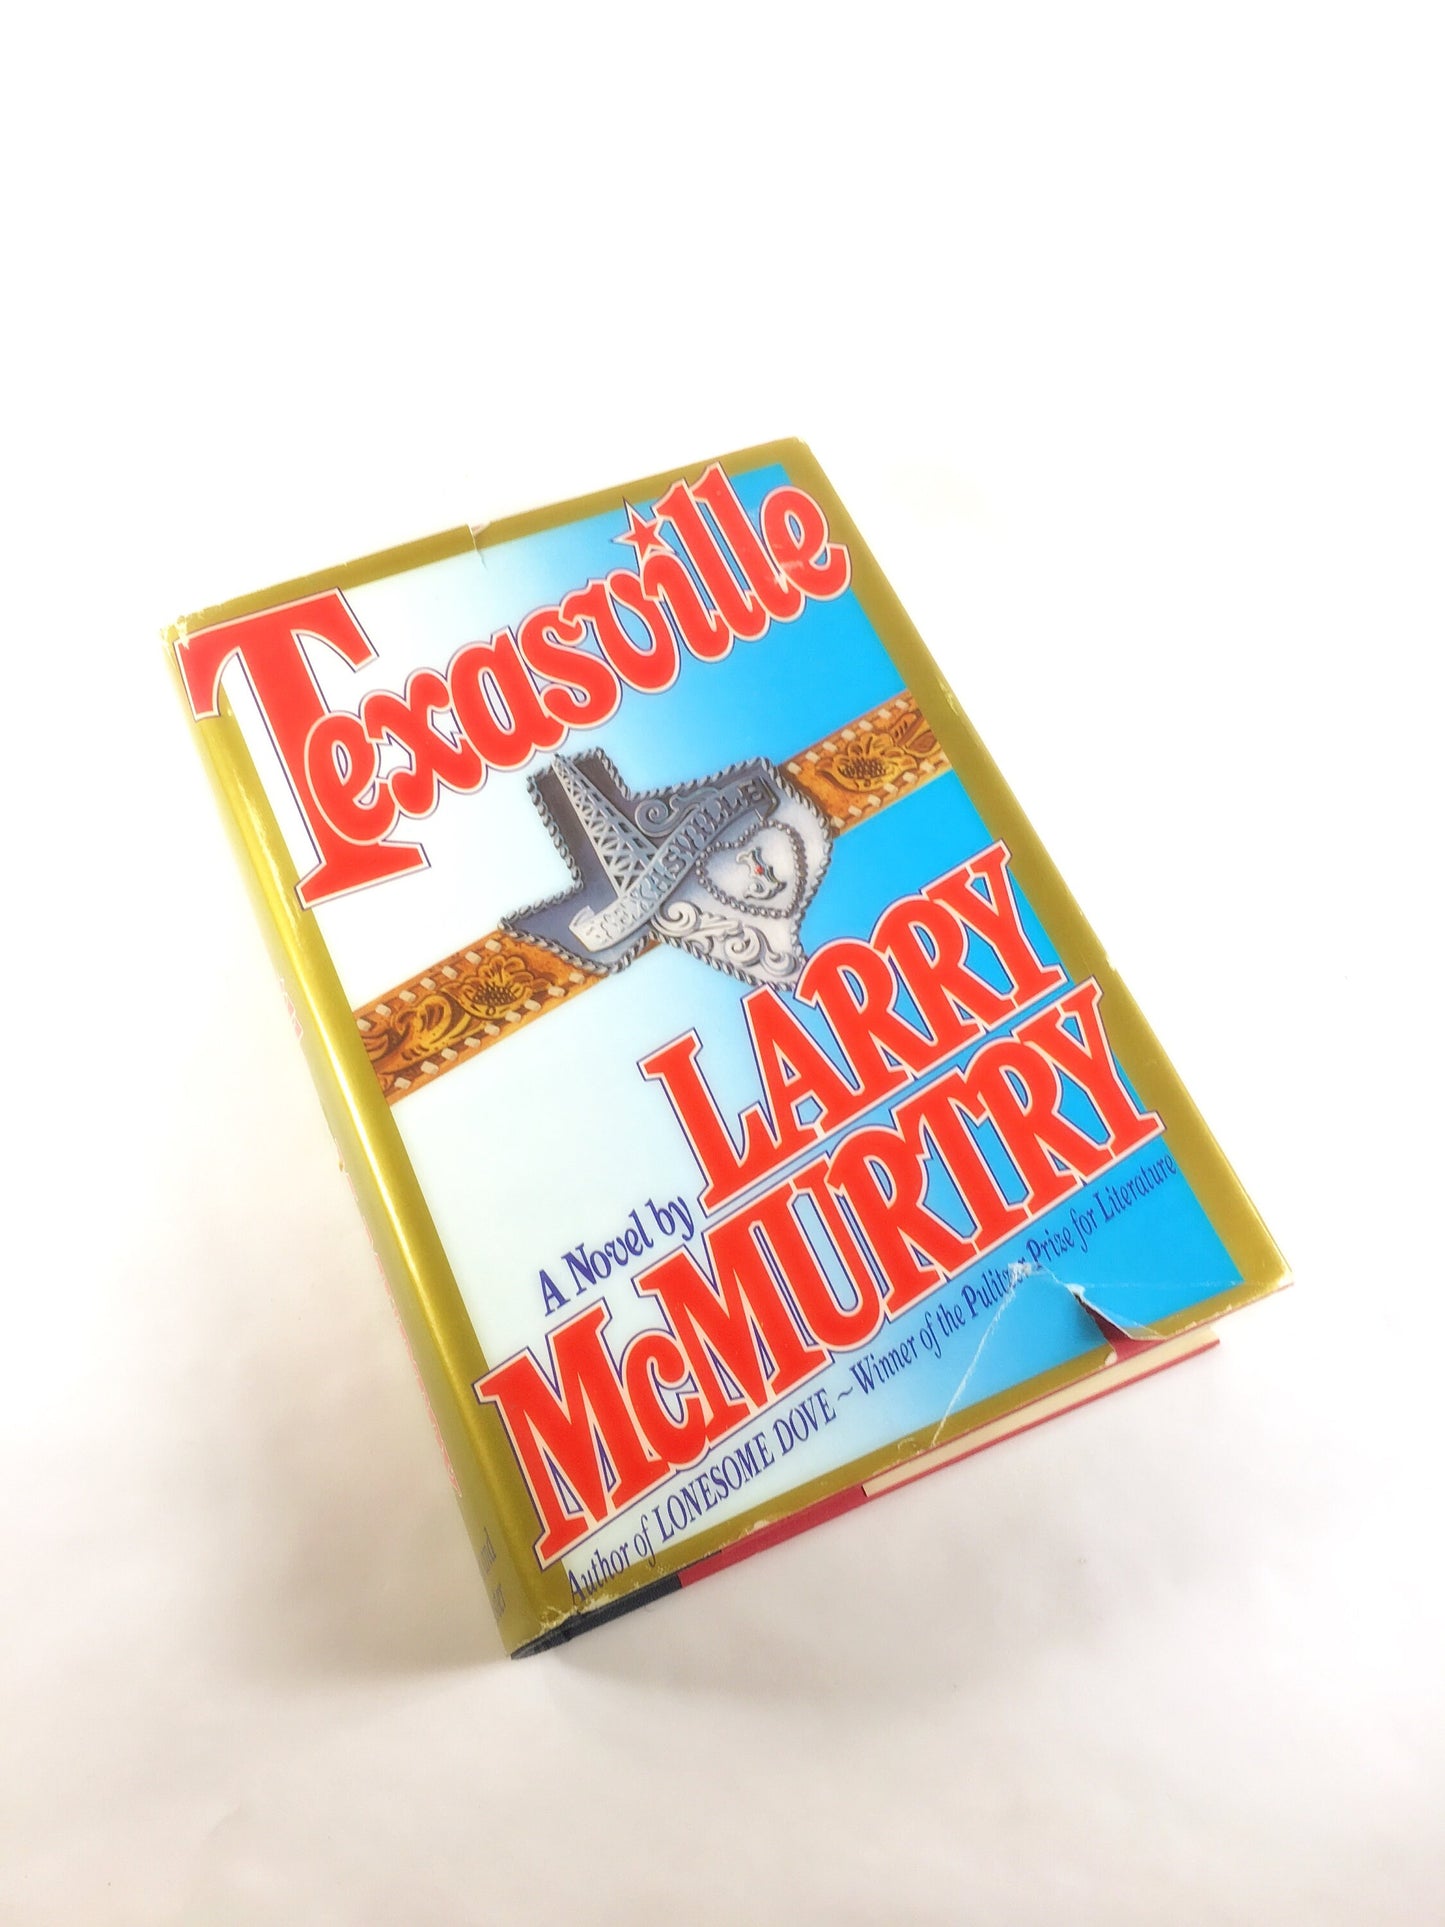 Texasville by Larry McMurtry Vintage FIRST EDITION book circa 1987. Lonesome Dove saga. Pulitzer Prize Western The Last Picture Show